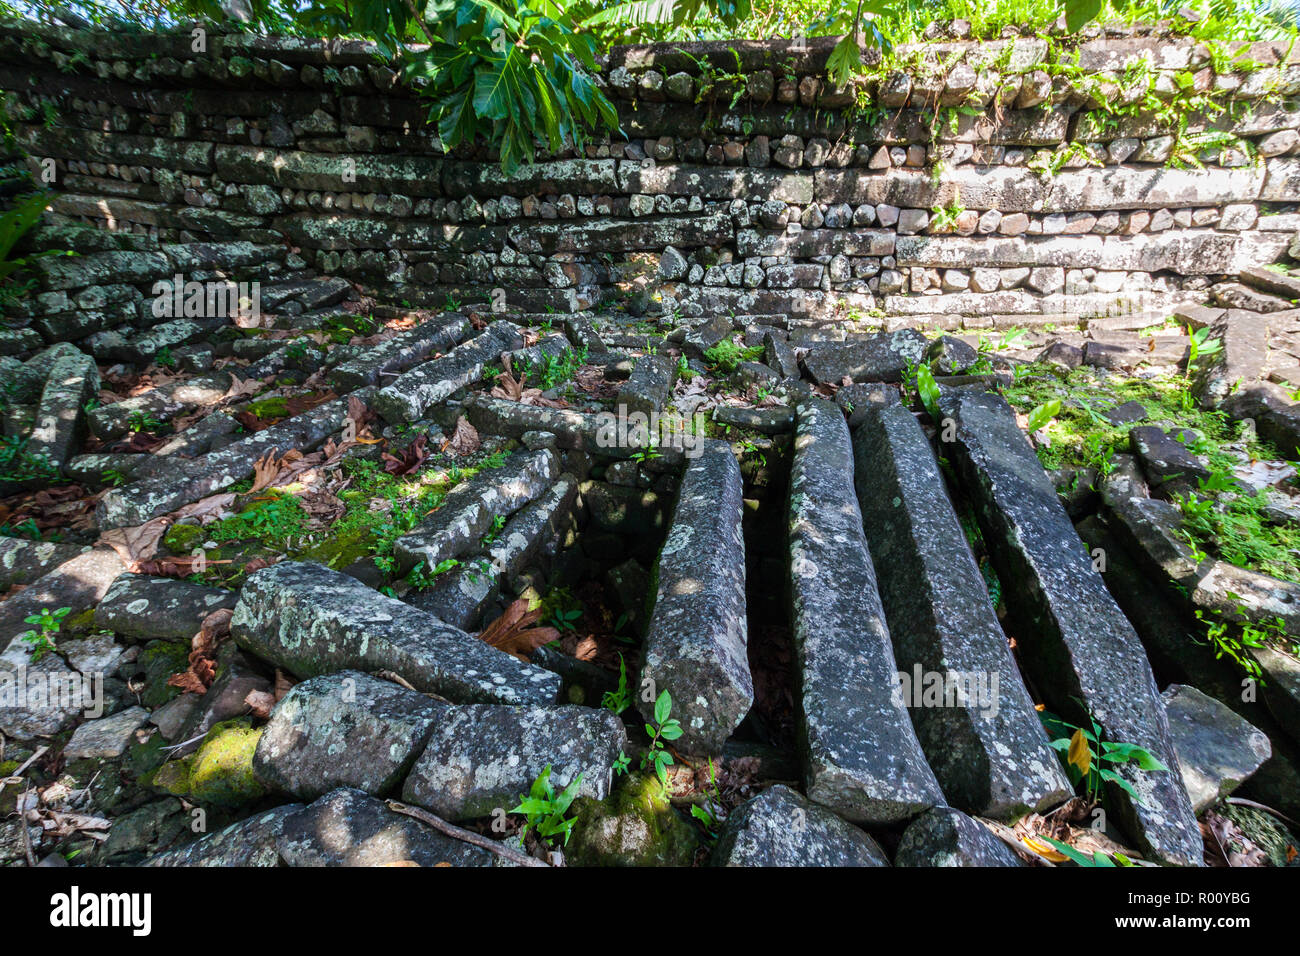 Inside Nan Madol: walls, and secret underground room made of large basalt slabs, overgrown ruins in the jungle, Pohnpei, Micronesia, Oceania Stock Photo